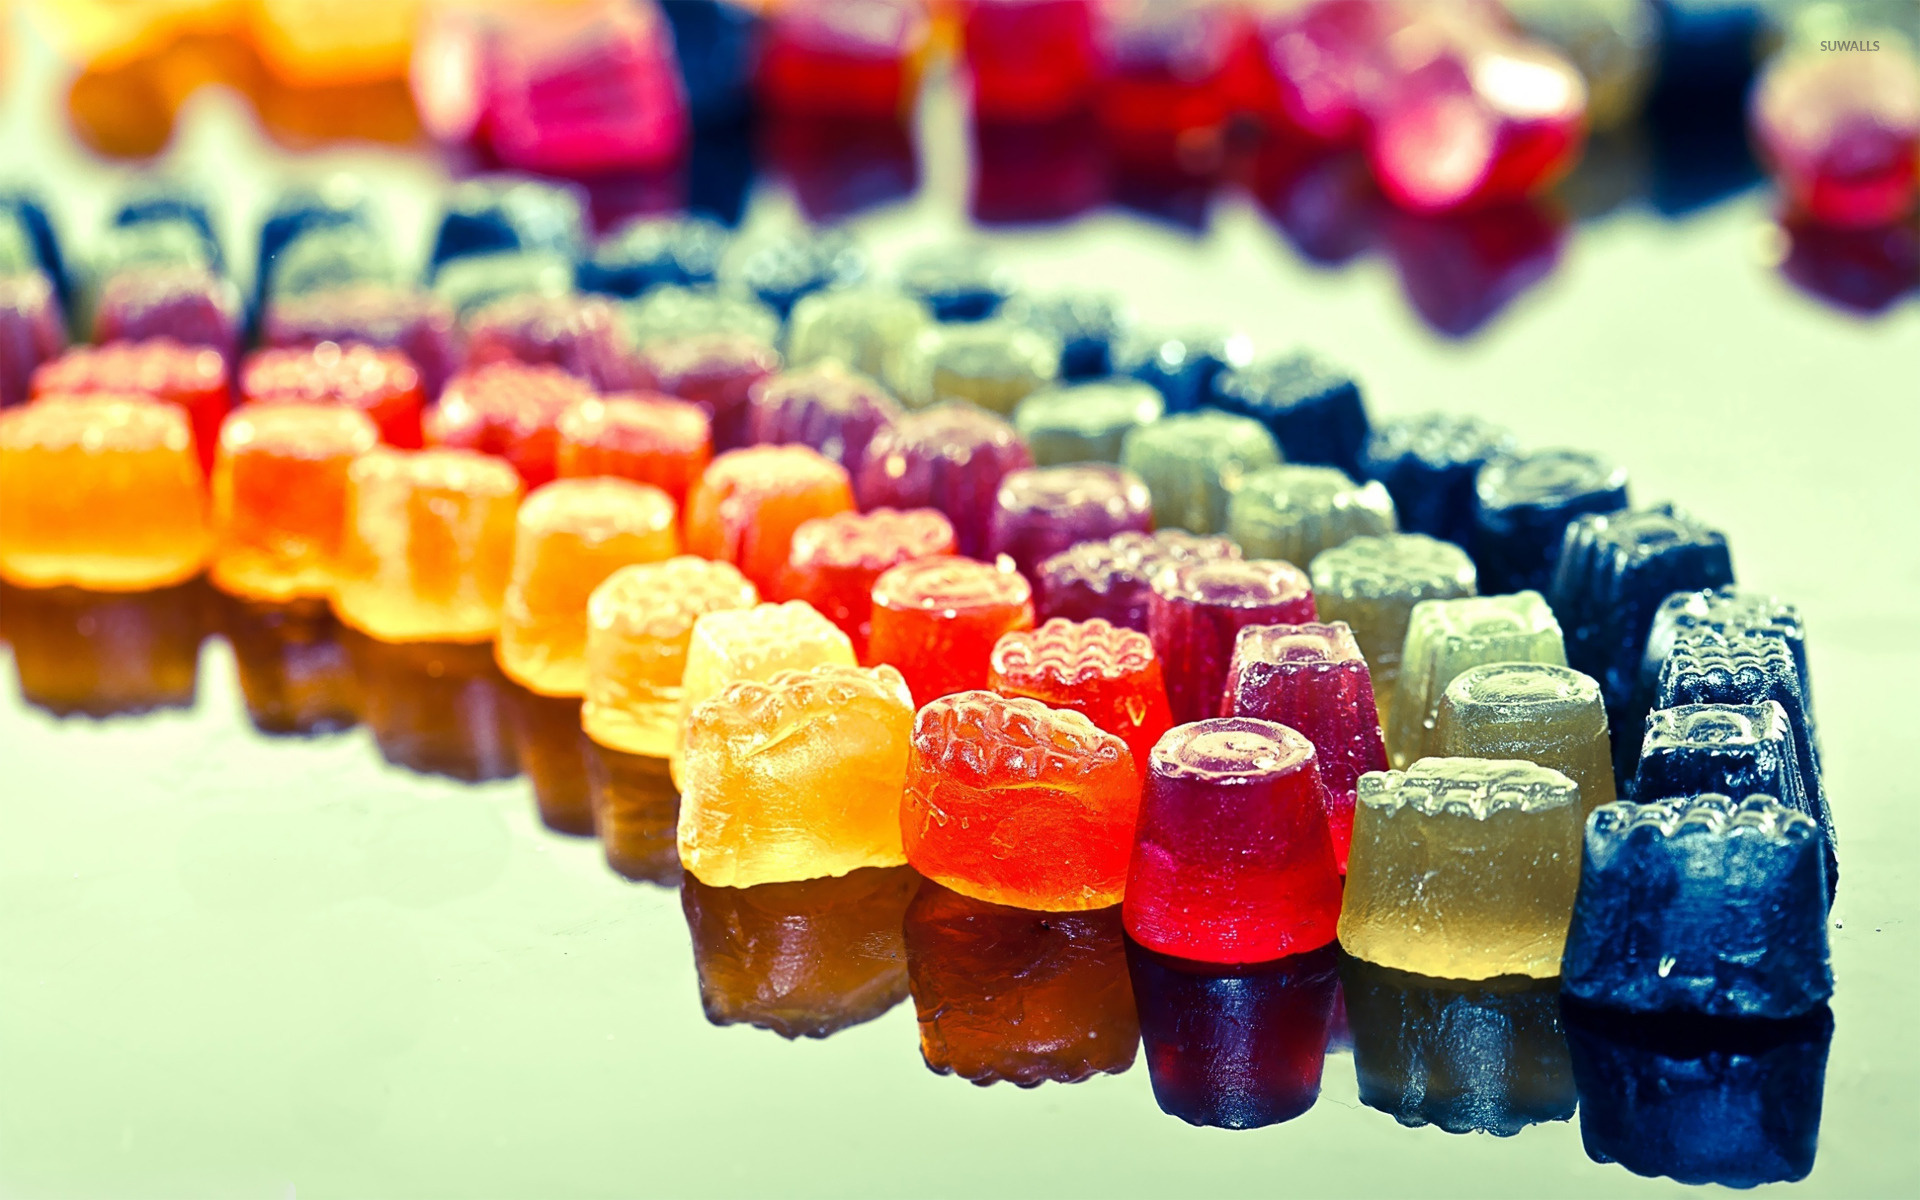 Jelly candy wallpaper, Photographic candy delights, Colorful jelly candies, Visual feast, 1920x1200 HD Desktop